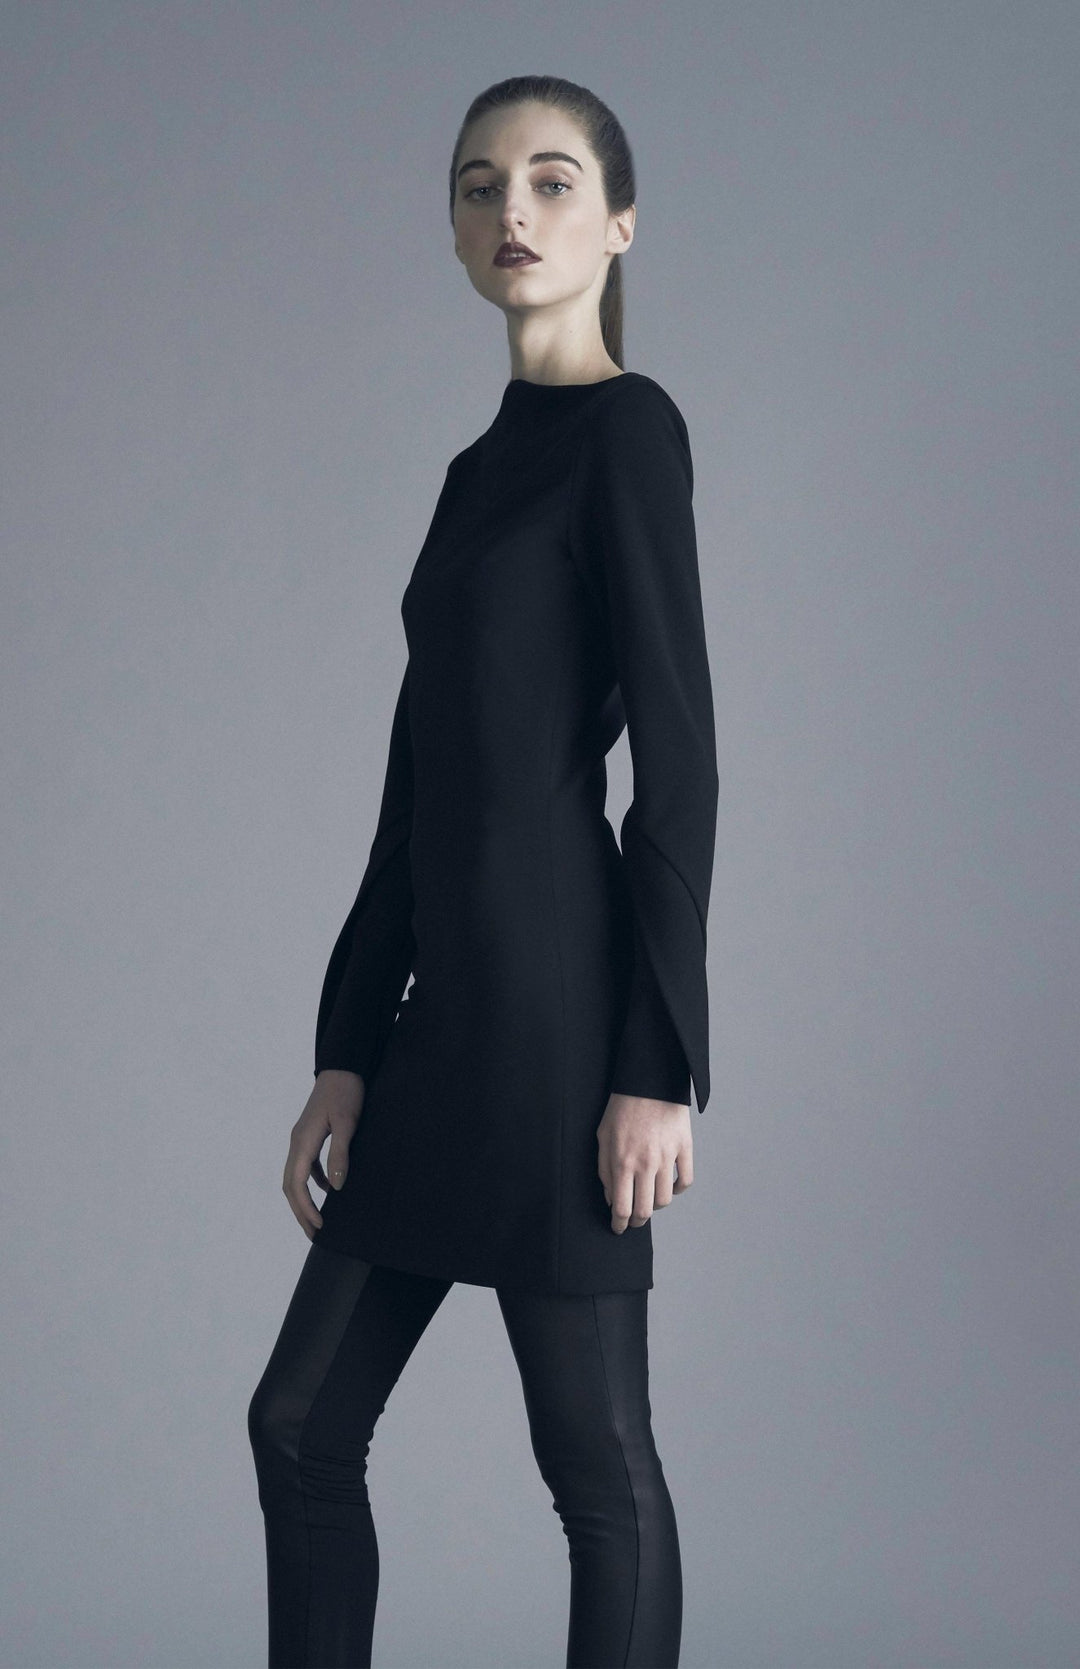 Chic, black, long sleeve short fitted dress, with high neck, long sleeves, made in stretch crepe.